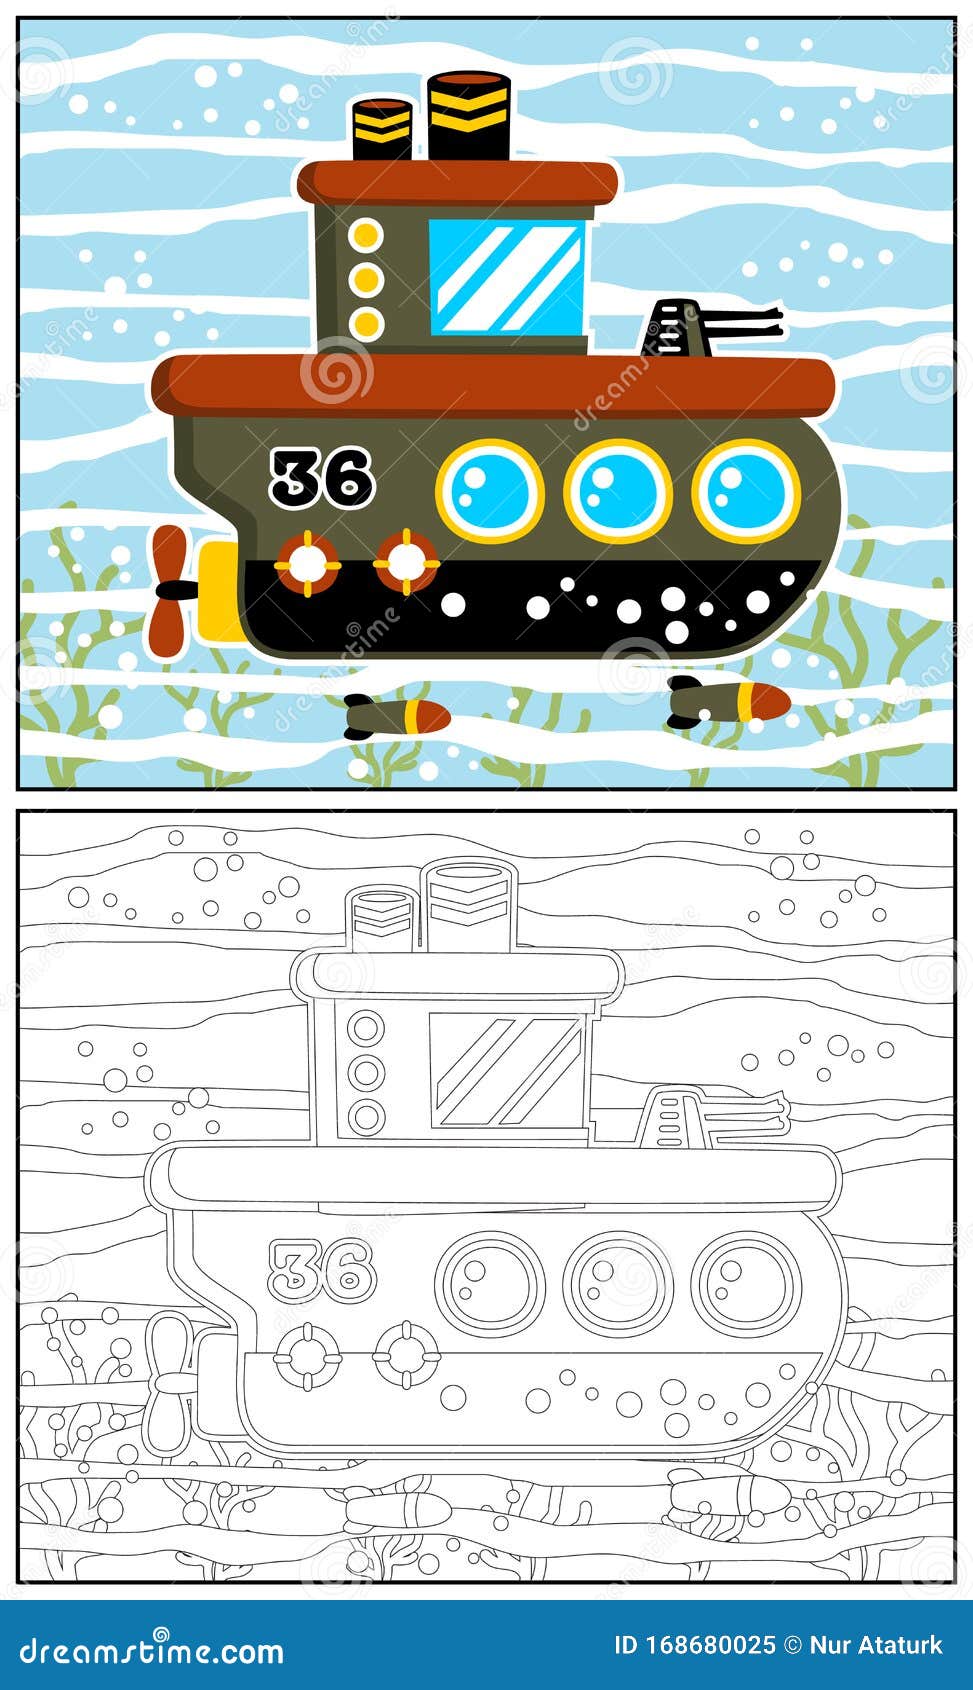 Download Vector Cartoon Of Military Submarine, Coloring Book Or Page Stock Vector - Illustration of ...